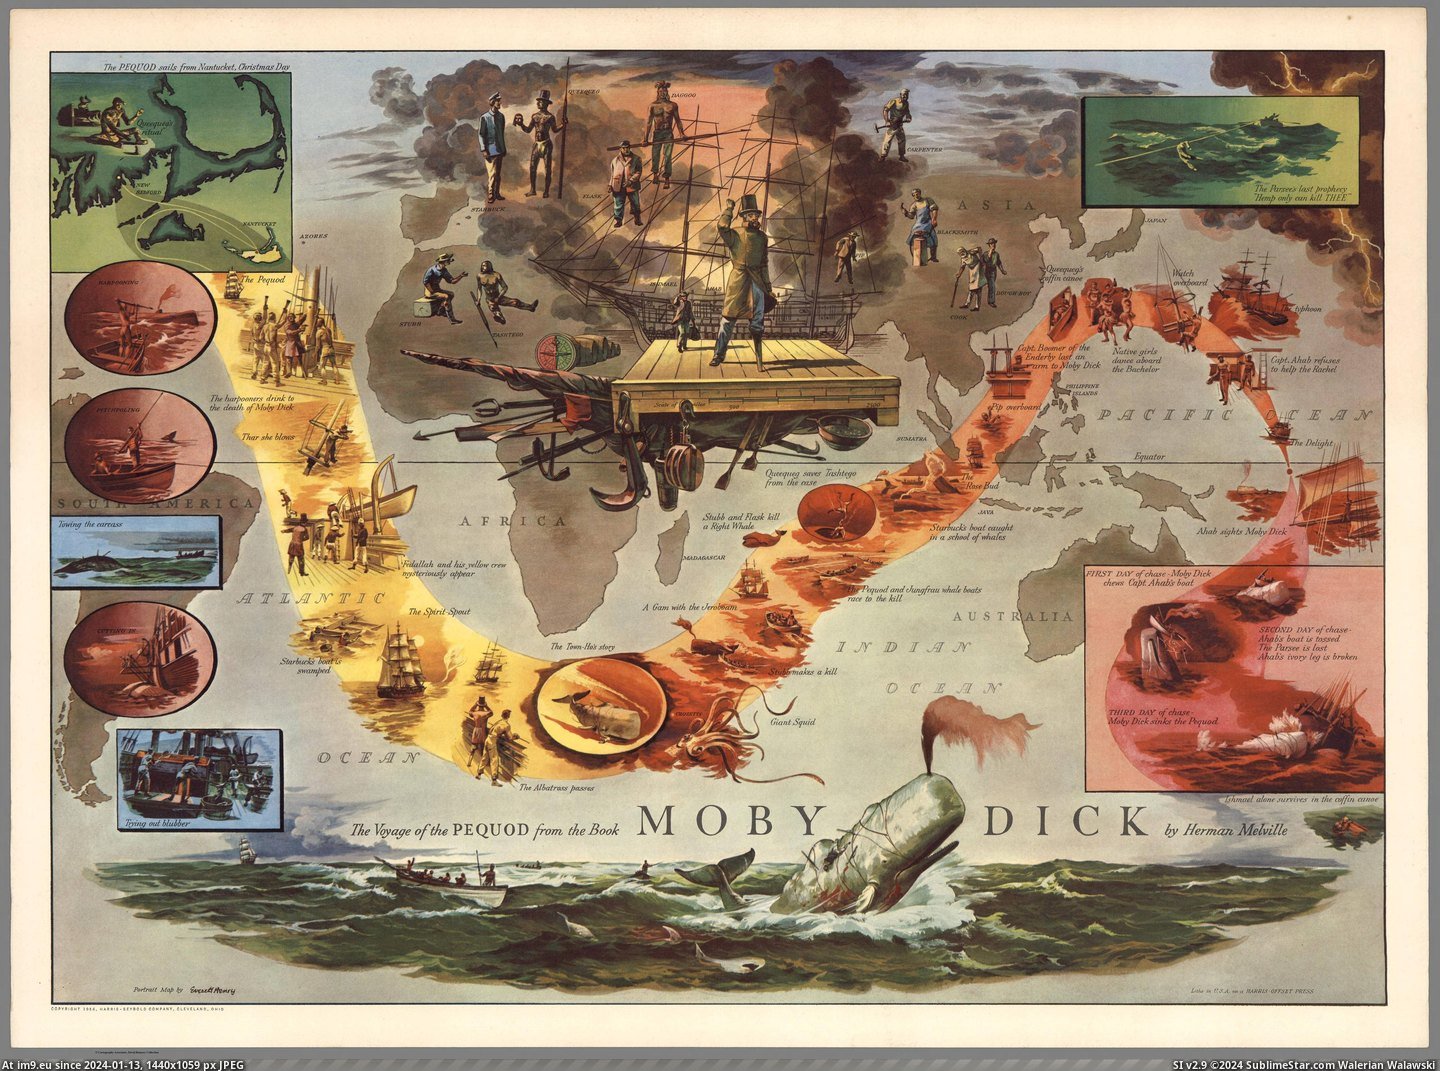 #Map #Dick #Book #Created #Everett #Melville #Pequod #Henry #Moby #Herman #Voyage [Mapporn] The Voyage of the Pequod from the Book Moby Dick by Herman Melville. Map created by Everett Henry in 1956 [5118x3776] Pic. (Bild von album My r/MAPS favs))